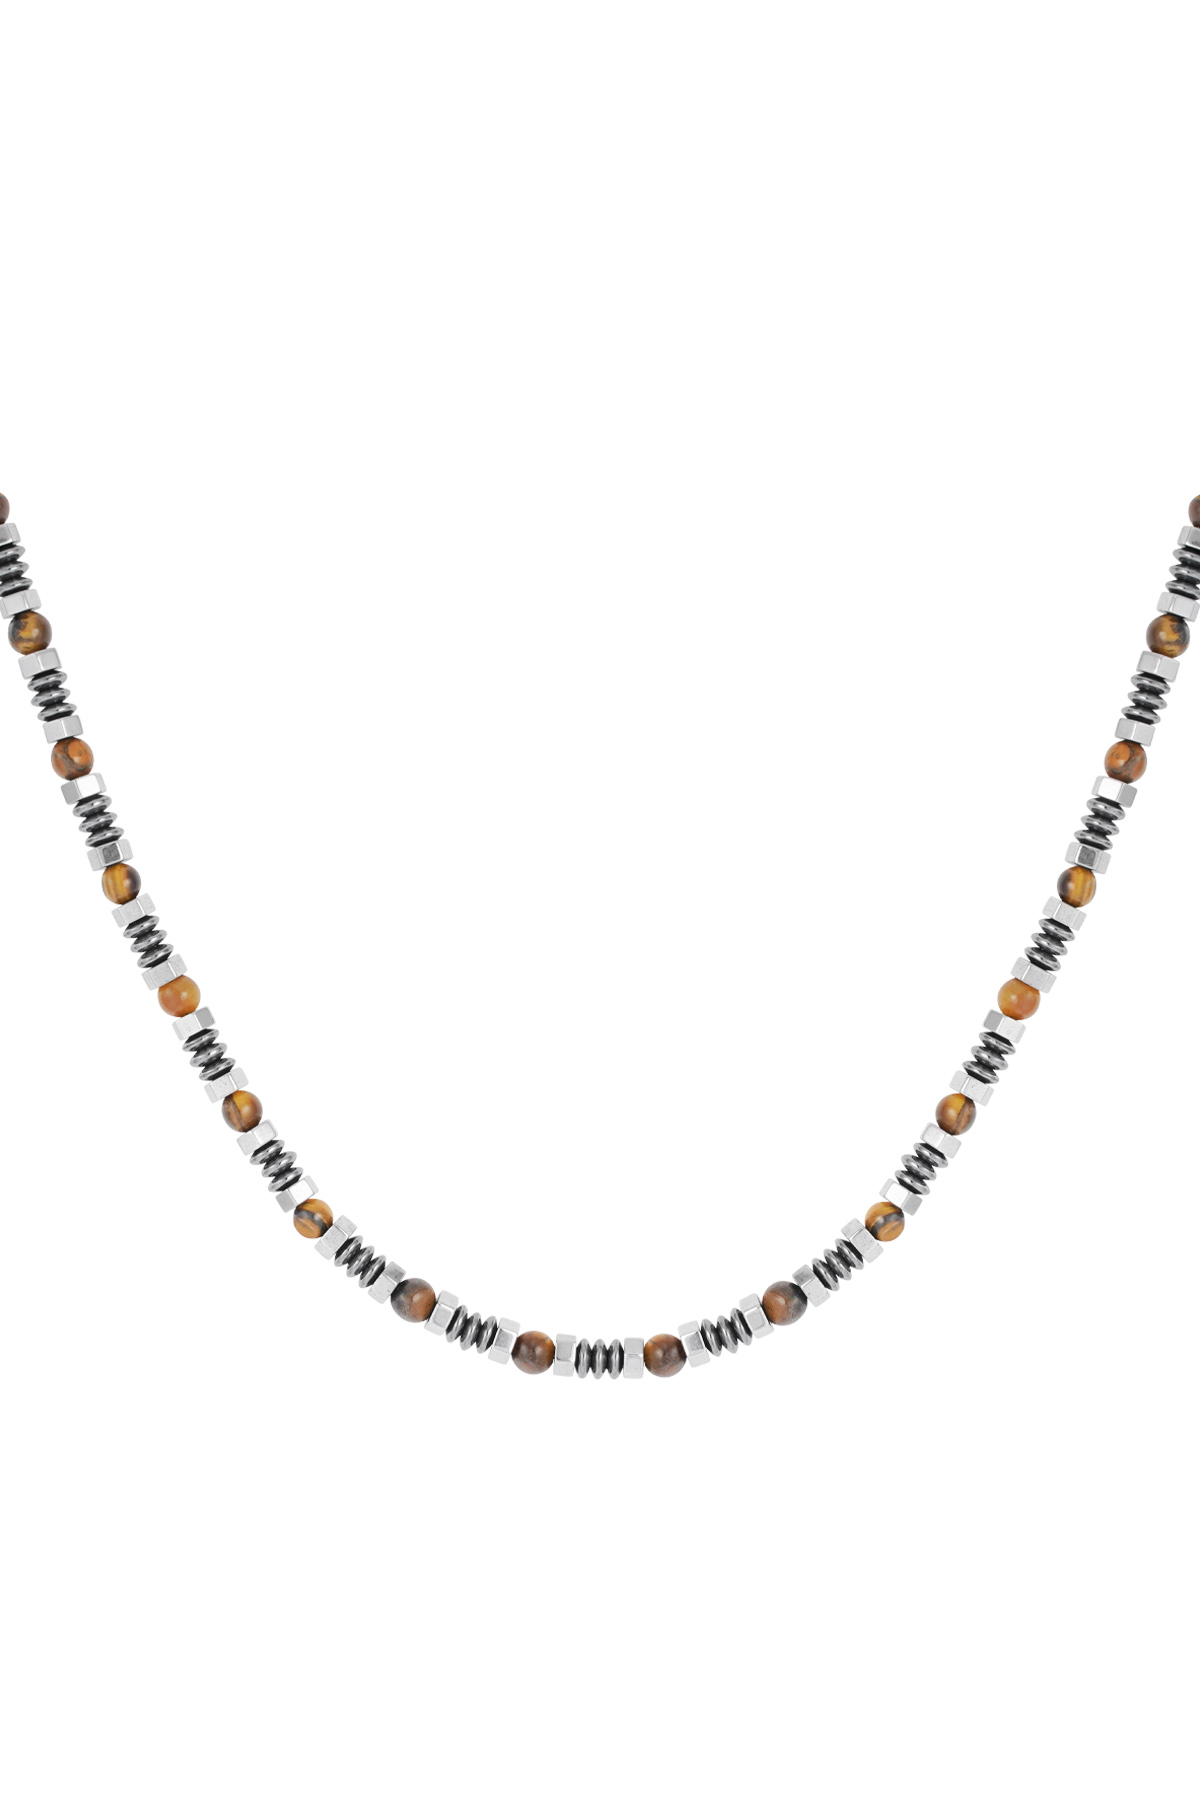 Men's necklace with charms and beads - brown 